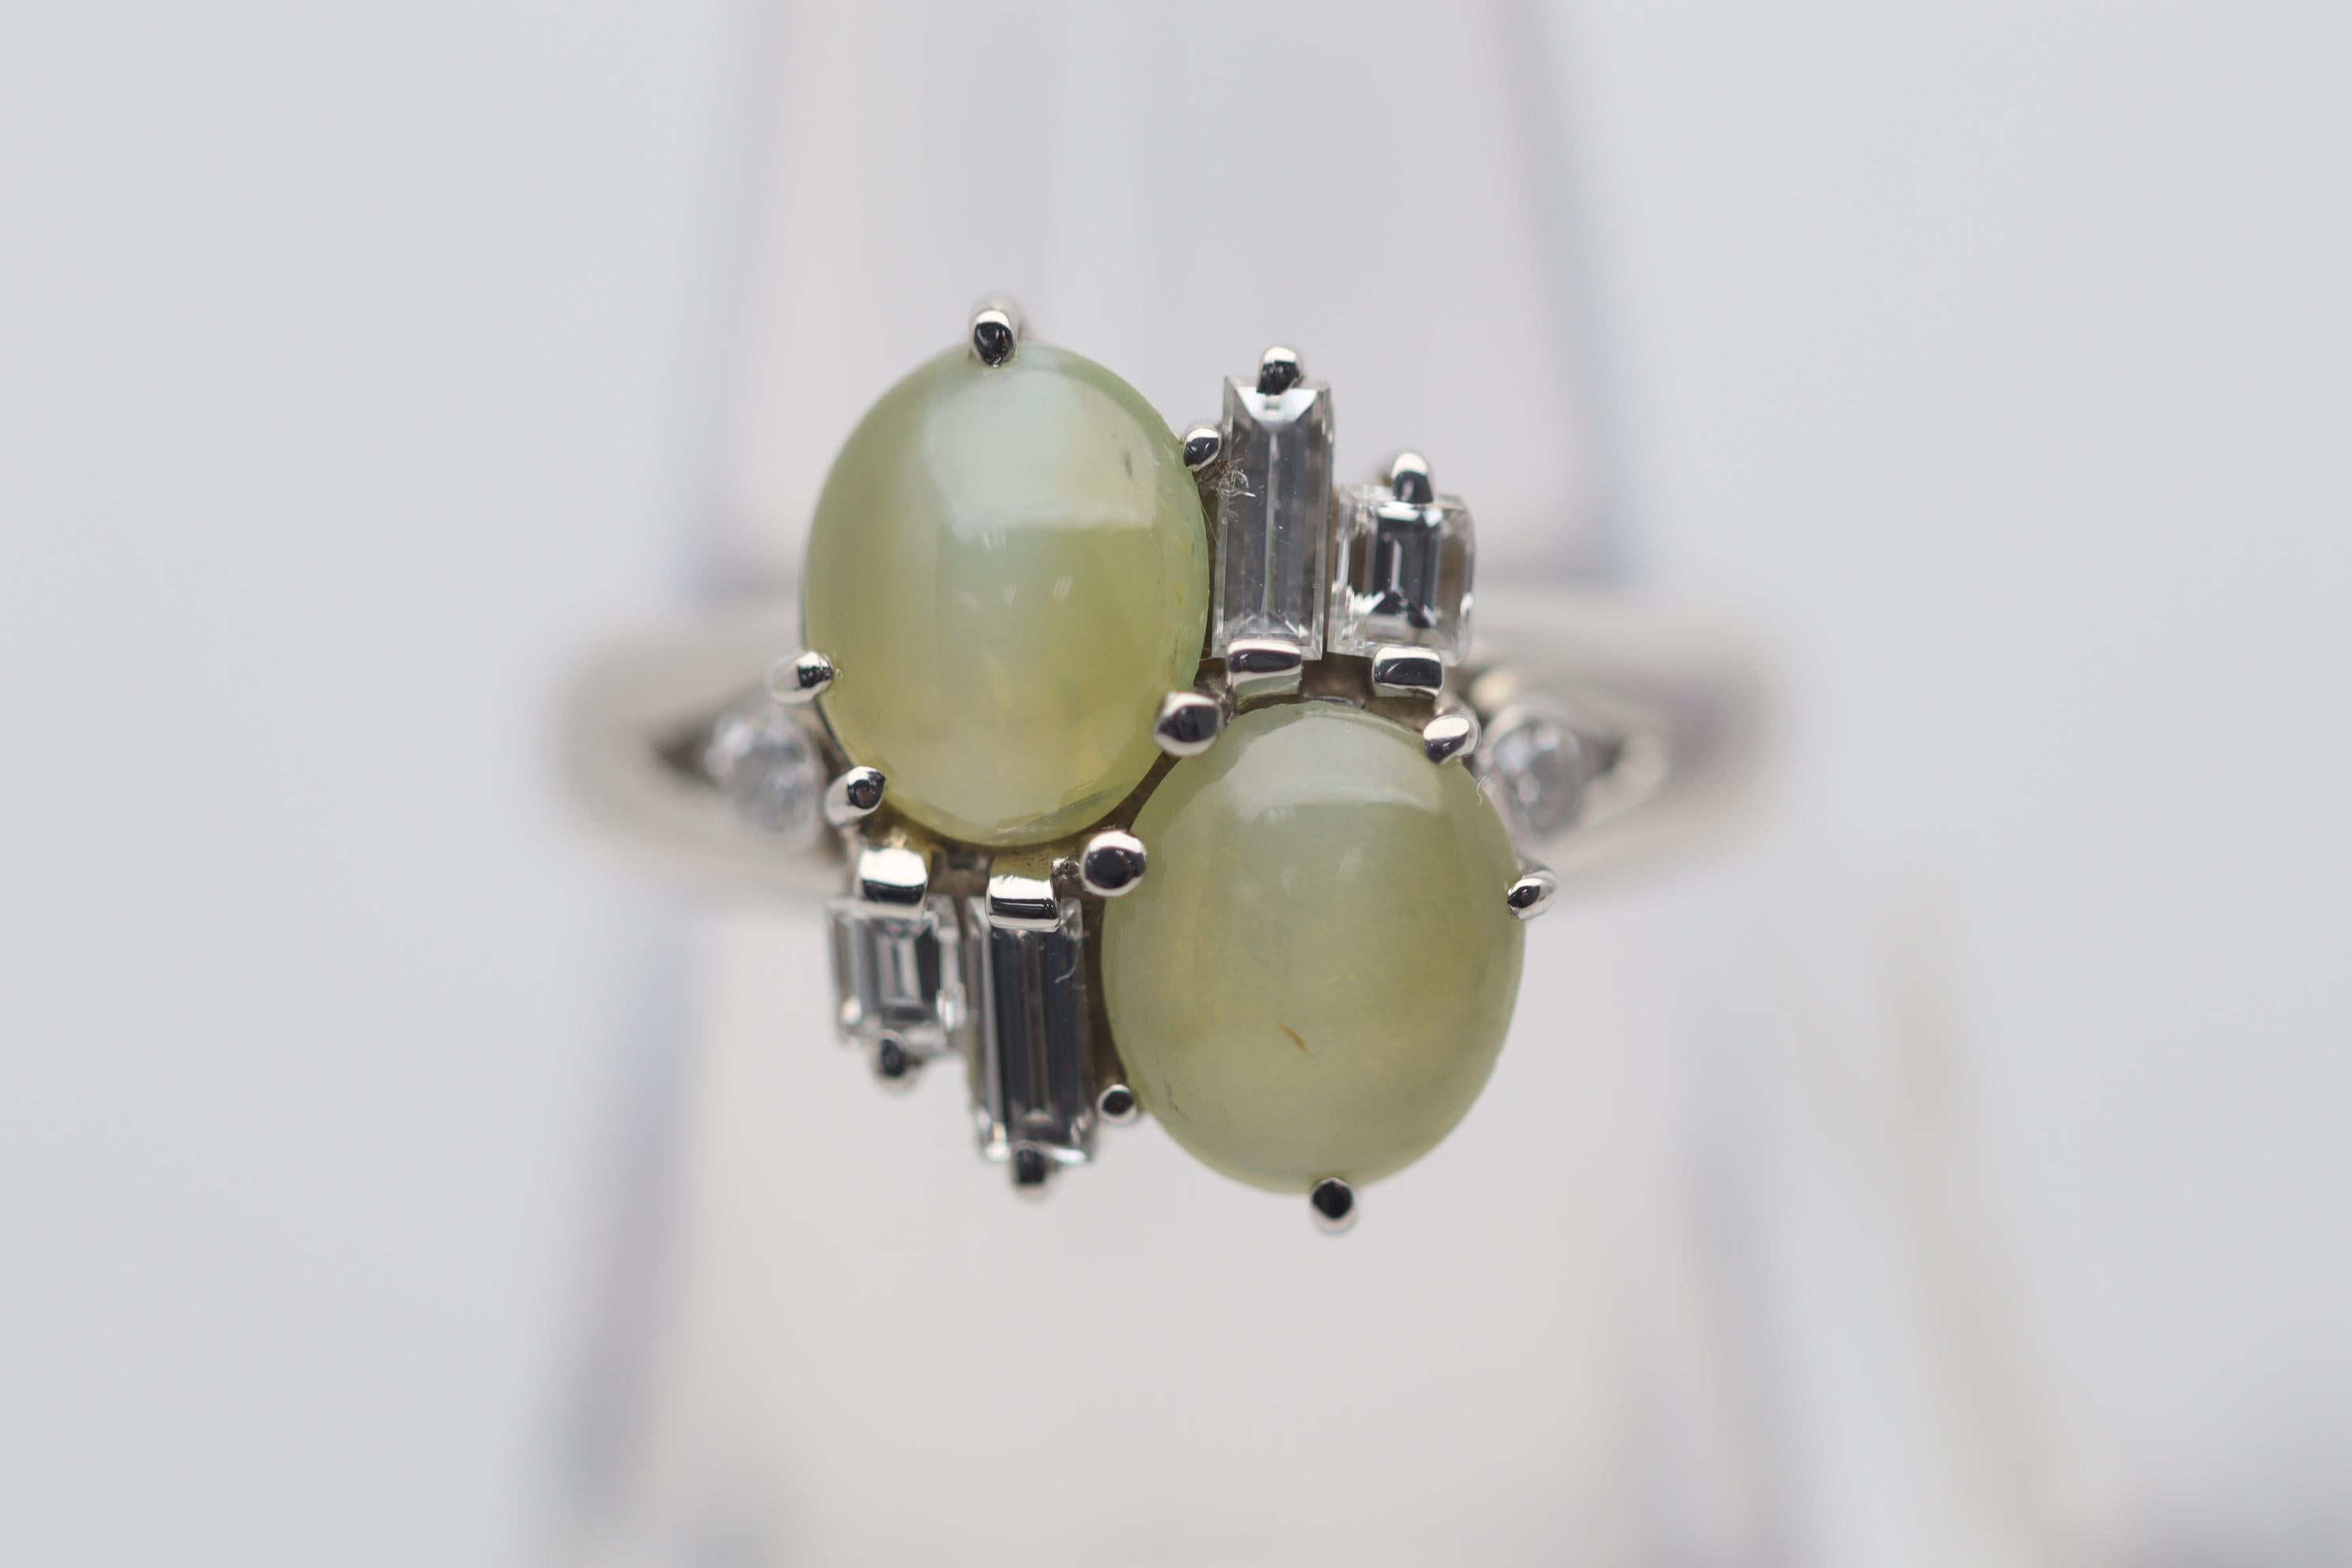 A fine and stylish ring featuring a pair of cats eye chrysoberyl. They are perfectly matching in their fine “milk & honey” color along with their strong chatoyant cats eye. They weigh a total of 2.62 carats and are complemented by 6 diamonds